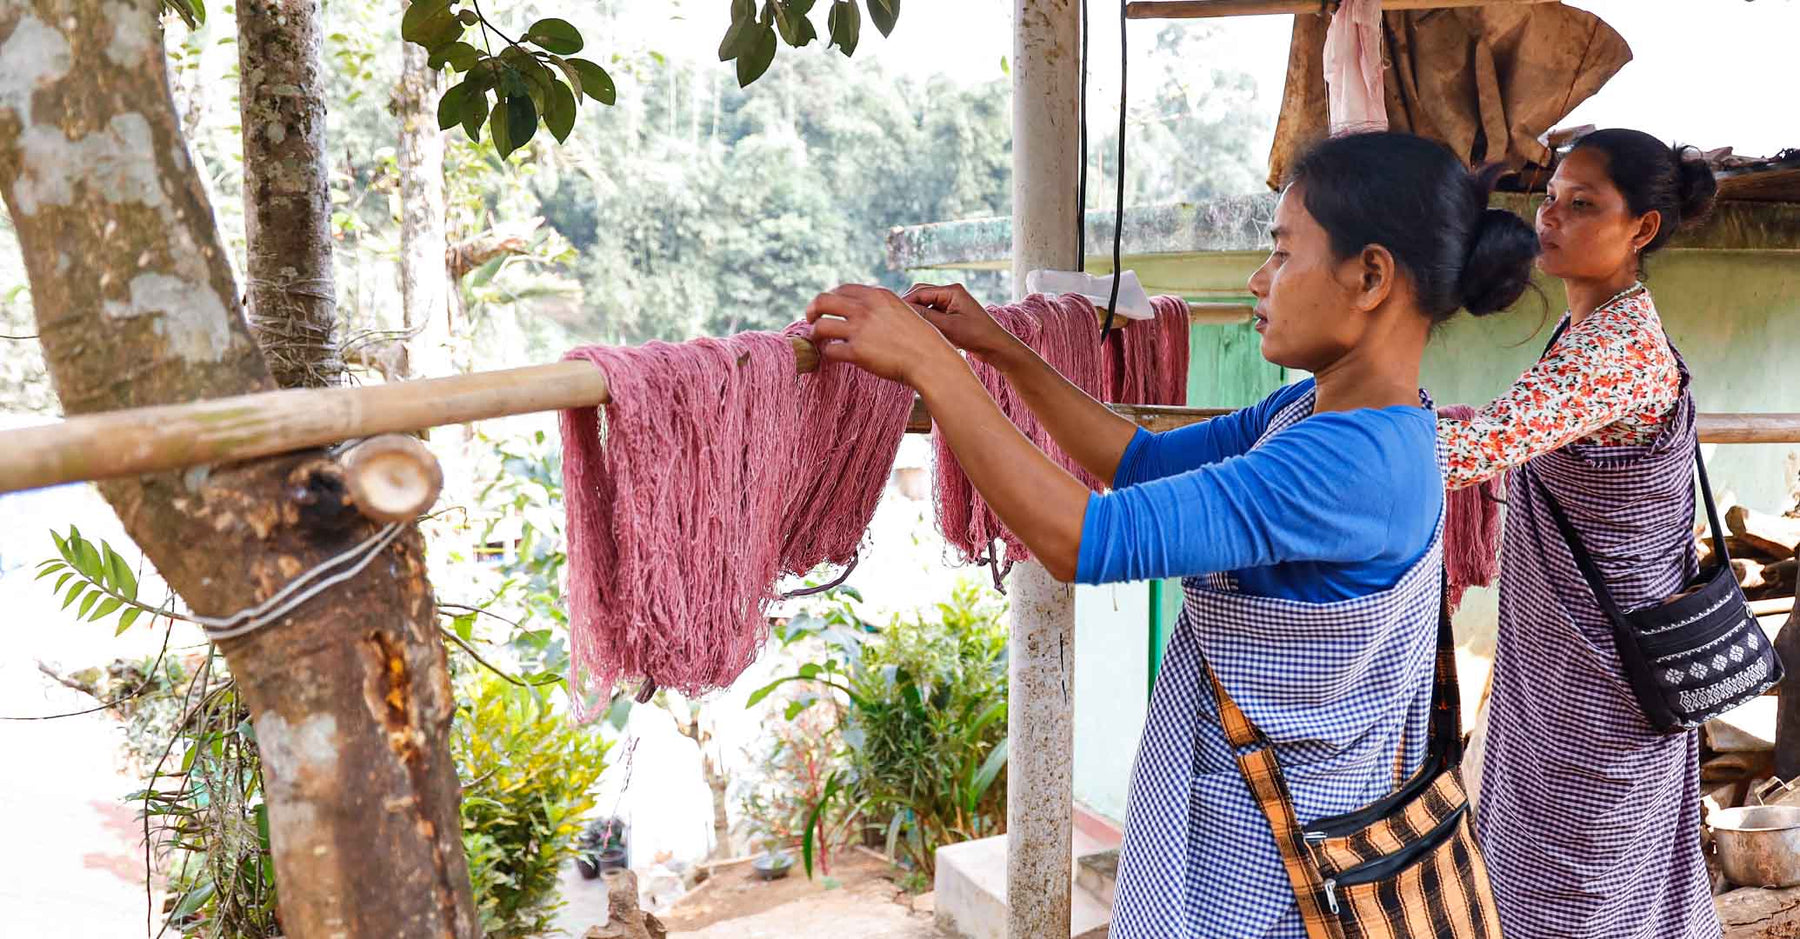 That’s why Muezart assures 100% natural Eri Silk from the pristine villages of Meghalaya. We partner with women who rear silkworms, spin yarn and dye with natural ingredients. 